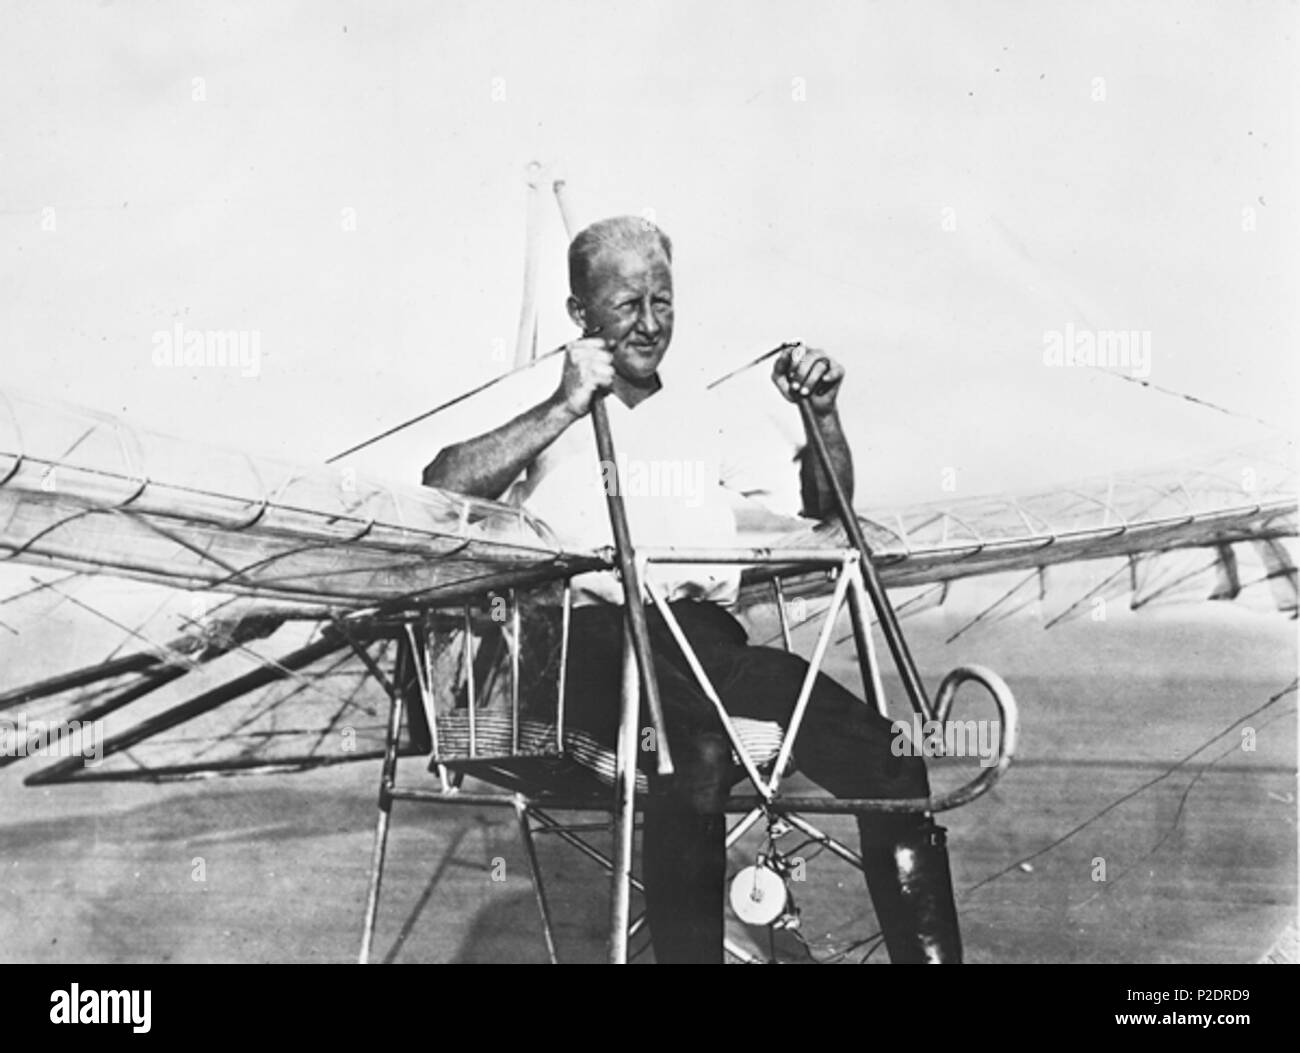 . Local call number: PR00456 Corporate author: Underwood & Underwood. Title: [Ornithopter and inventor George R. White at Saint Augustine] Physical descrip: 1 photograph: b&w ; 10 x 8 in. General note: The ornithopter was a wing-flapping, foot-propelled flying machine made by George R. White, a former flying instructor from Stoney Brook, Long Island, New York. The frame weighed 118 pounds, the wingspan was 29.5 feet, and it was 8 feet in length. It was made of chrome molybdenum covered with a non-inflammable transparent celluloid fabric. Trial flights were conducted on the beach at St. Augusti Stock Photo